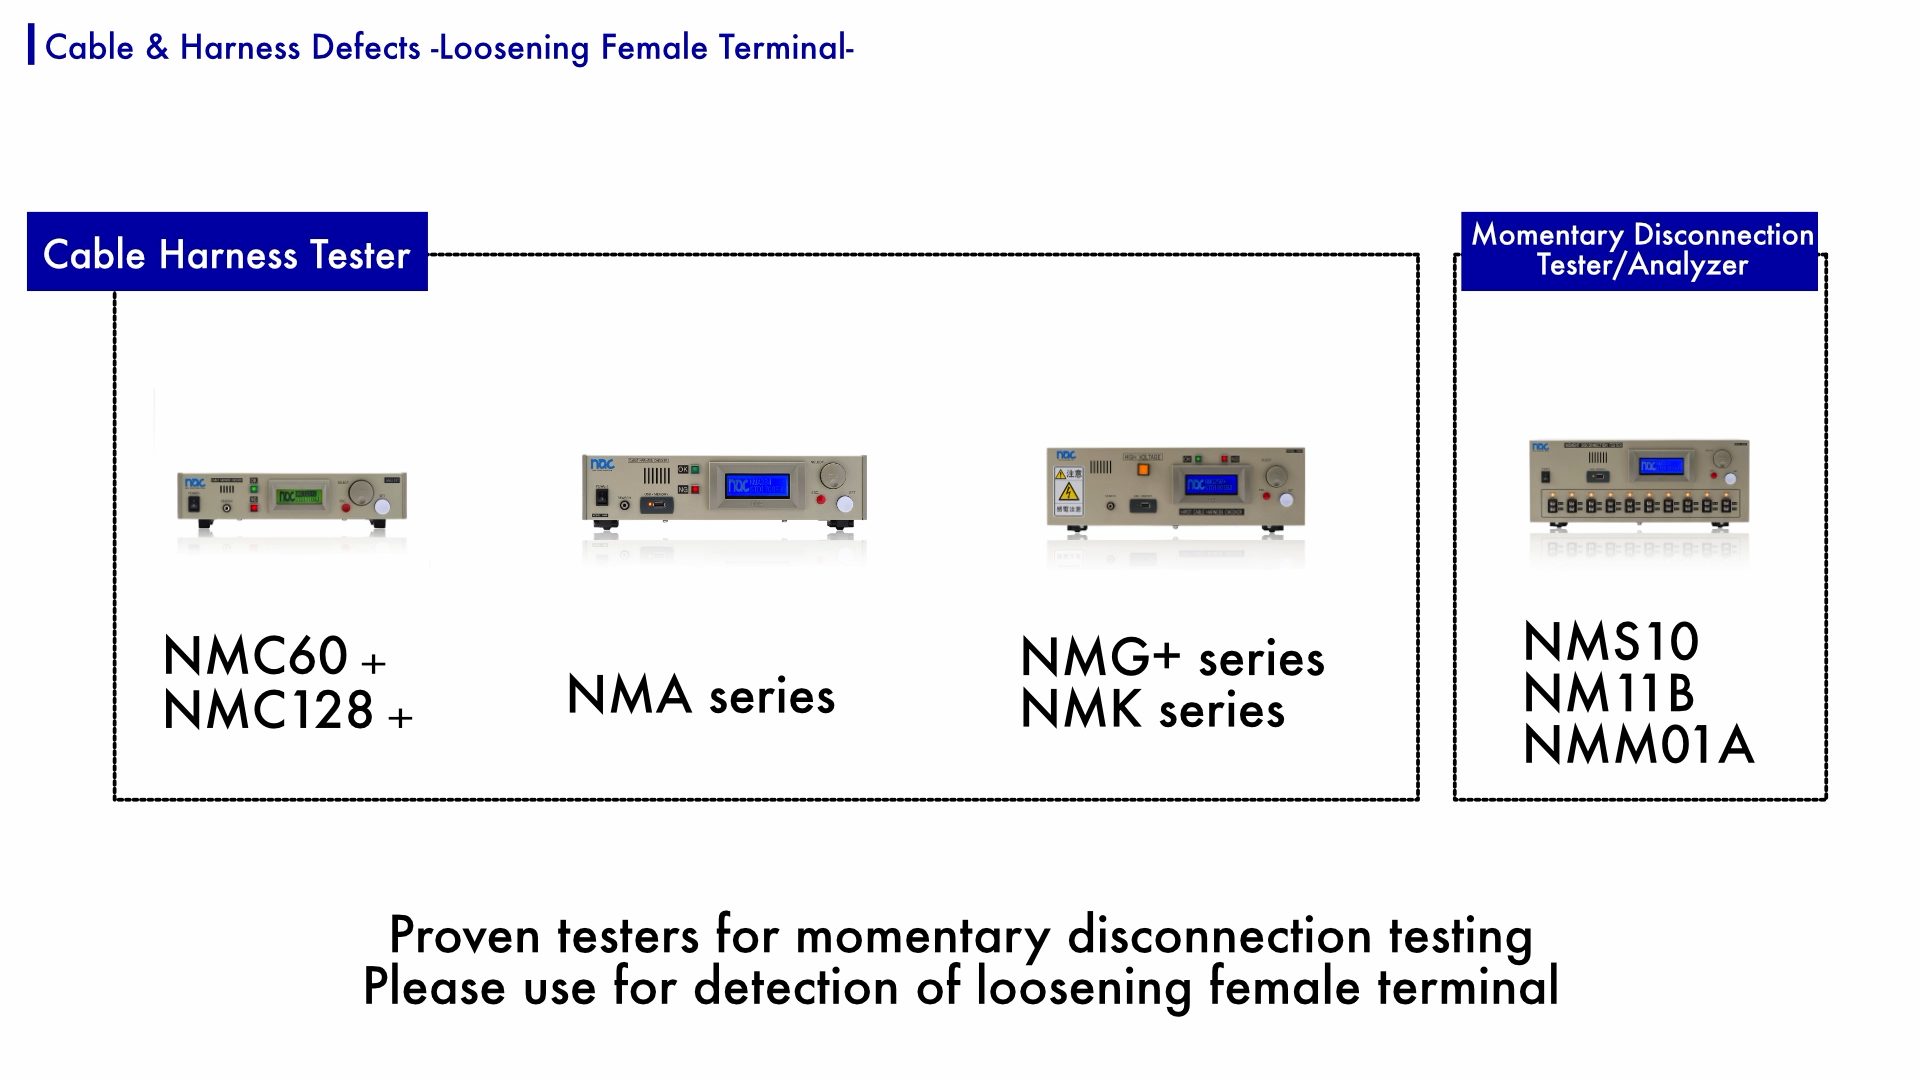 nac CORPORATION's testers are capable of momentary disconnection testing